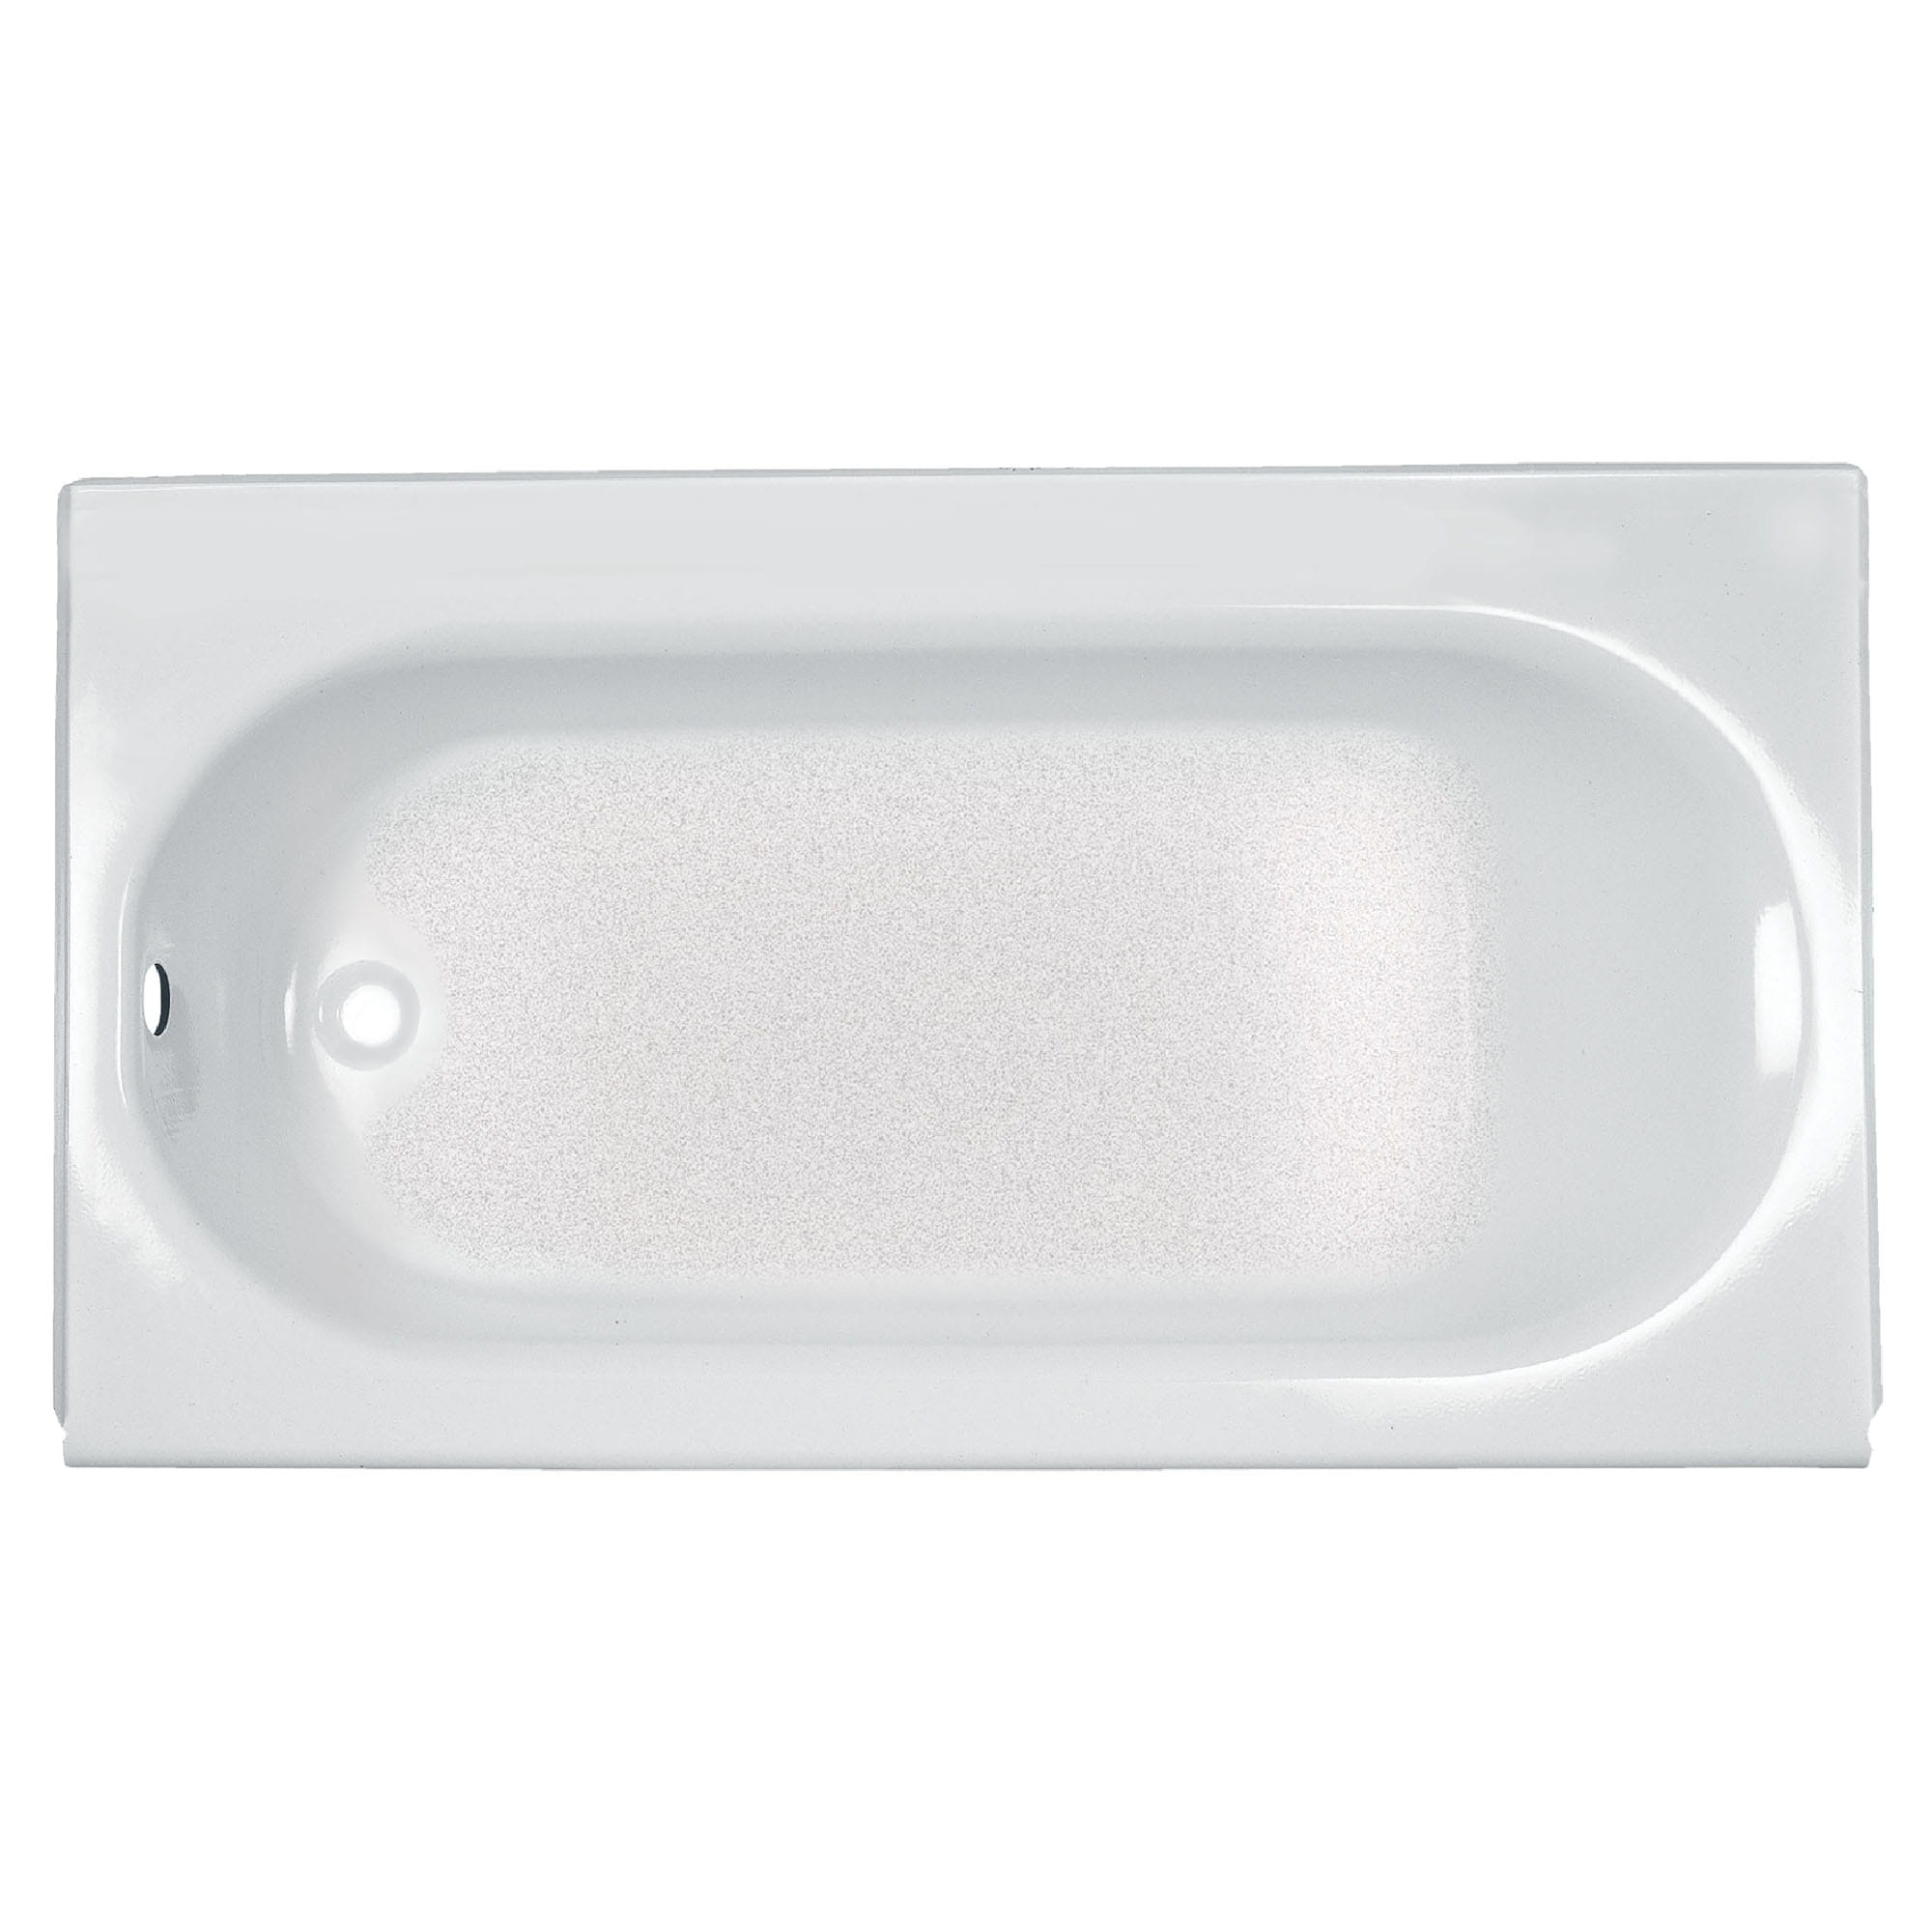 Princeton Americast 60 x 34 Inch Integral Apron Bathtub Left Hand Outlet With Luxury Ledge WHITE